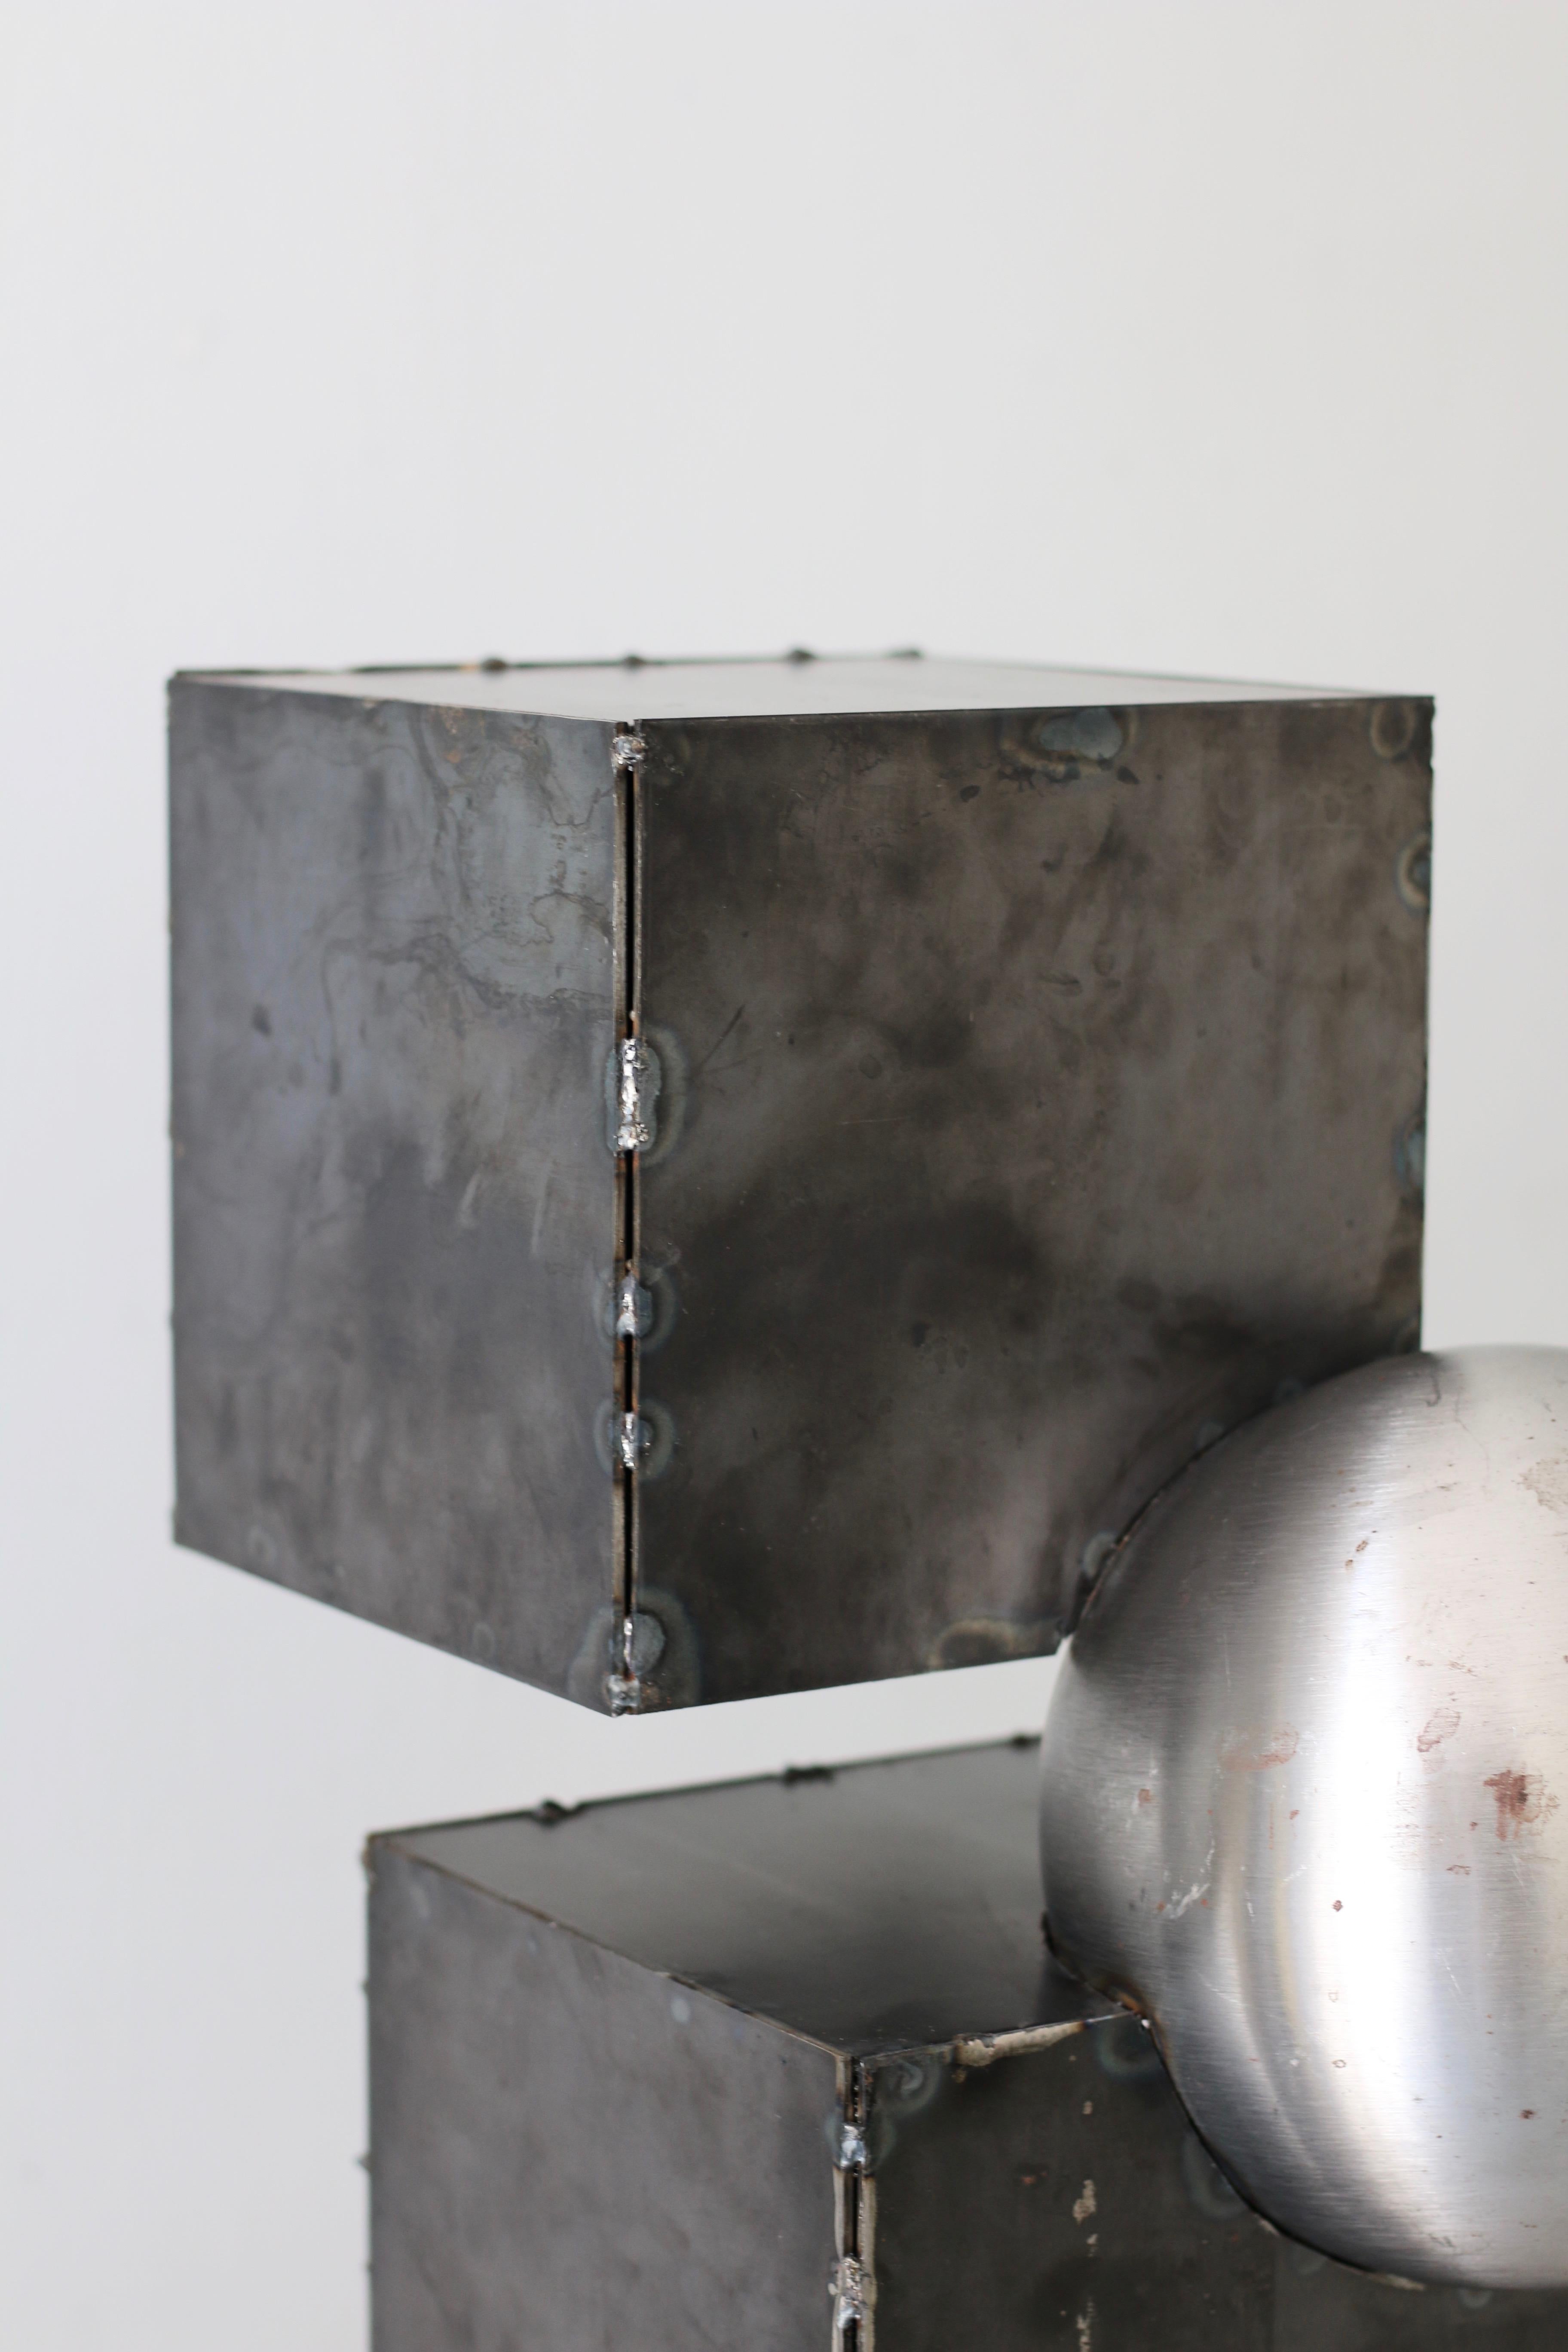 'Ice Cube' sculptural side table in welded raw steel. It features clean geometry and Brutalist influenced design. Heavy weight and extremely durable. Handcrafted, unique and signed.

Sabine Mezkaze Berzina (b.1988) is multi-media artist, furniture